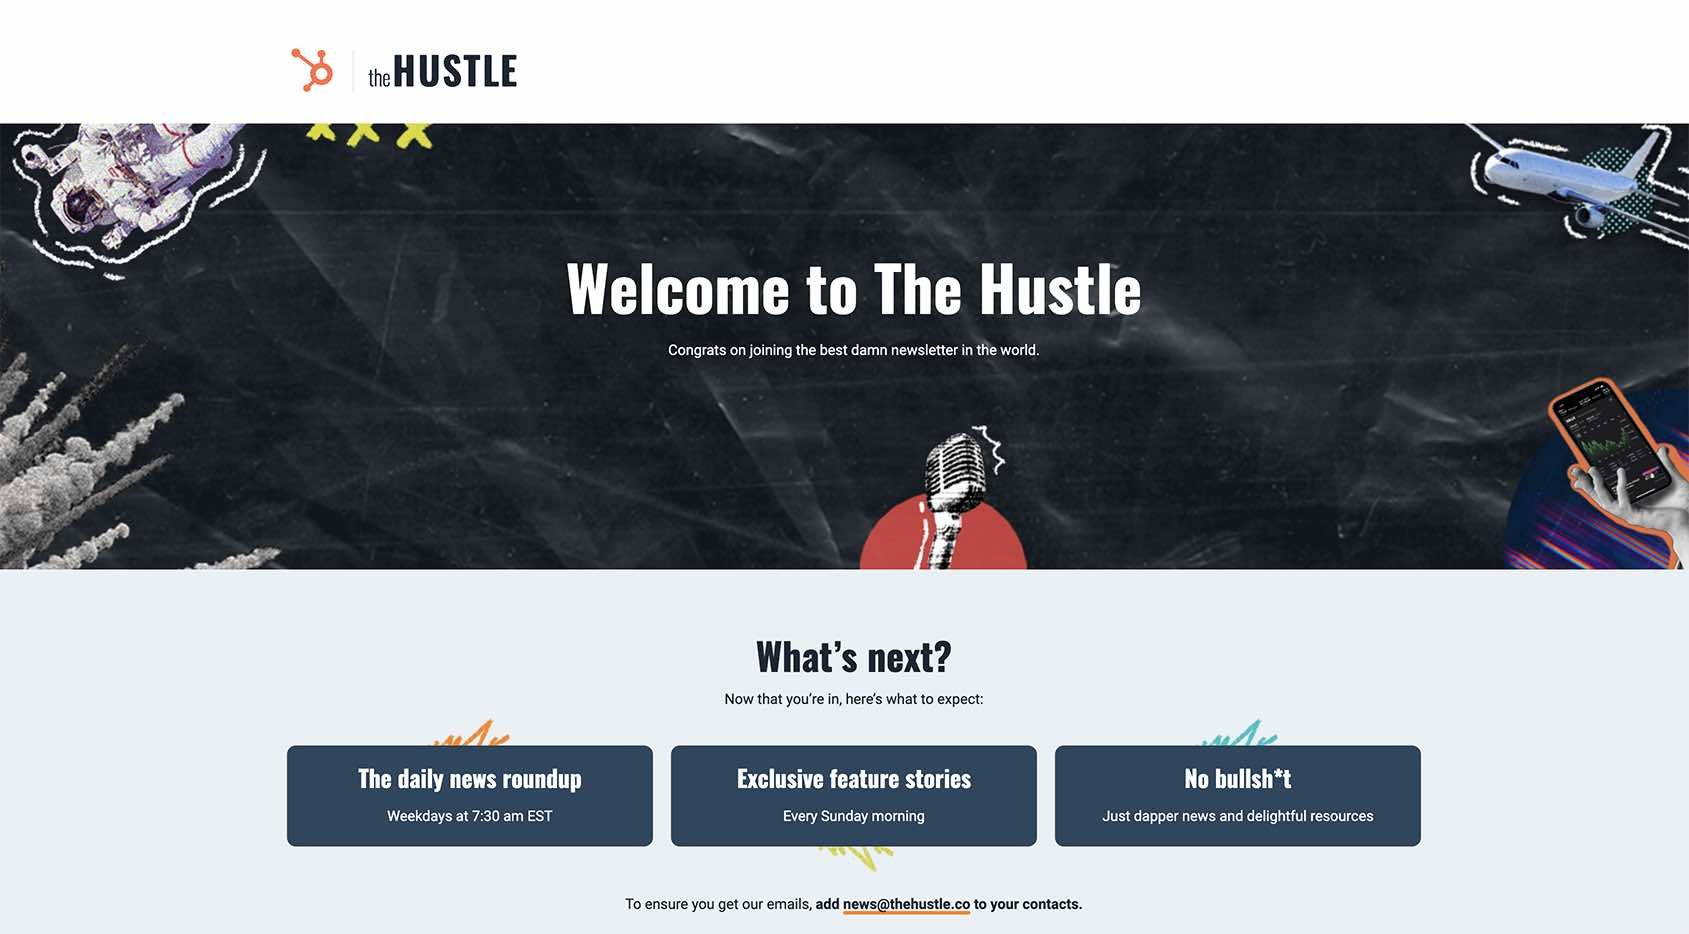 Newsletter sign-up form Welcome to the Hustle example page